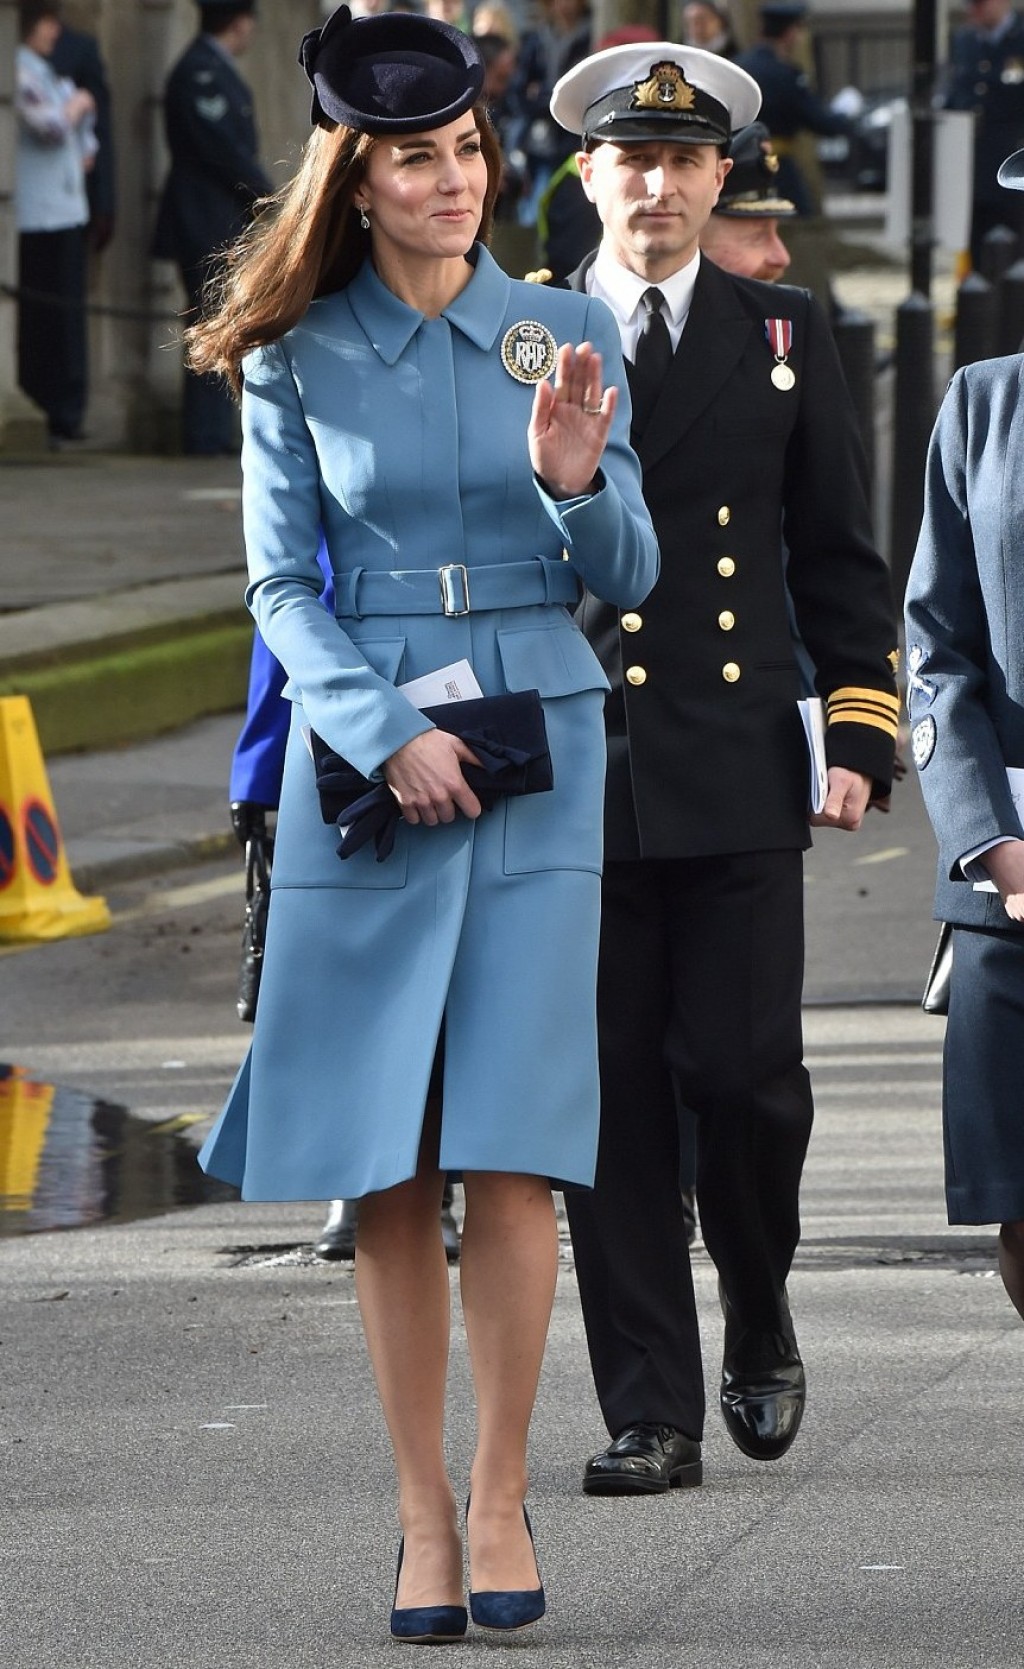 Air-Cadets-75th-anniversary-Kate-Middleton-Alexander-McQueen-1024x1669